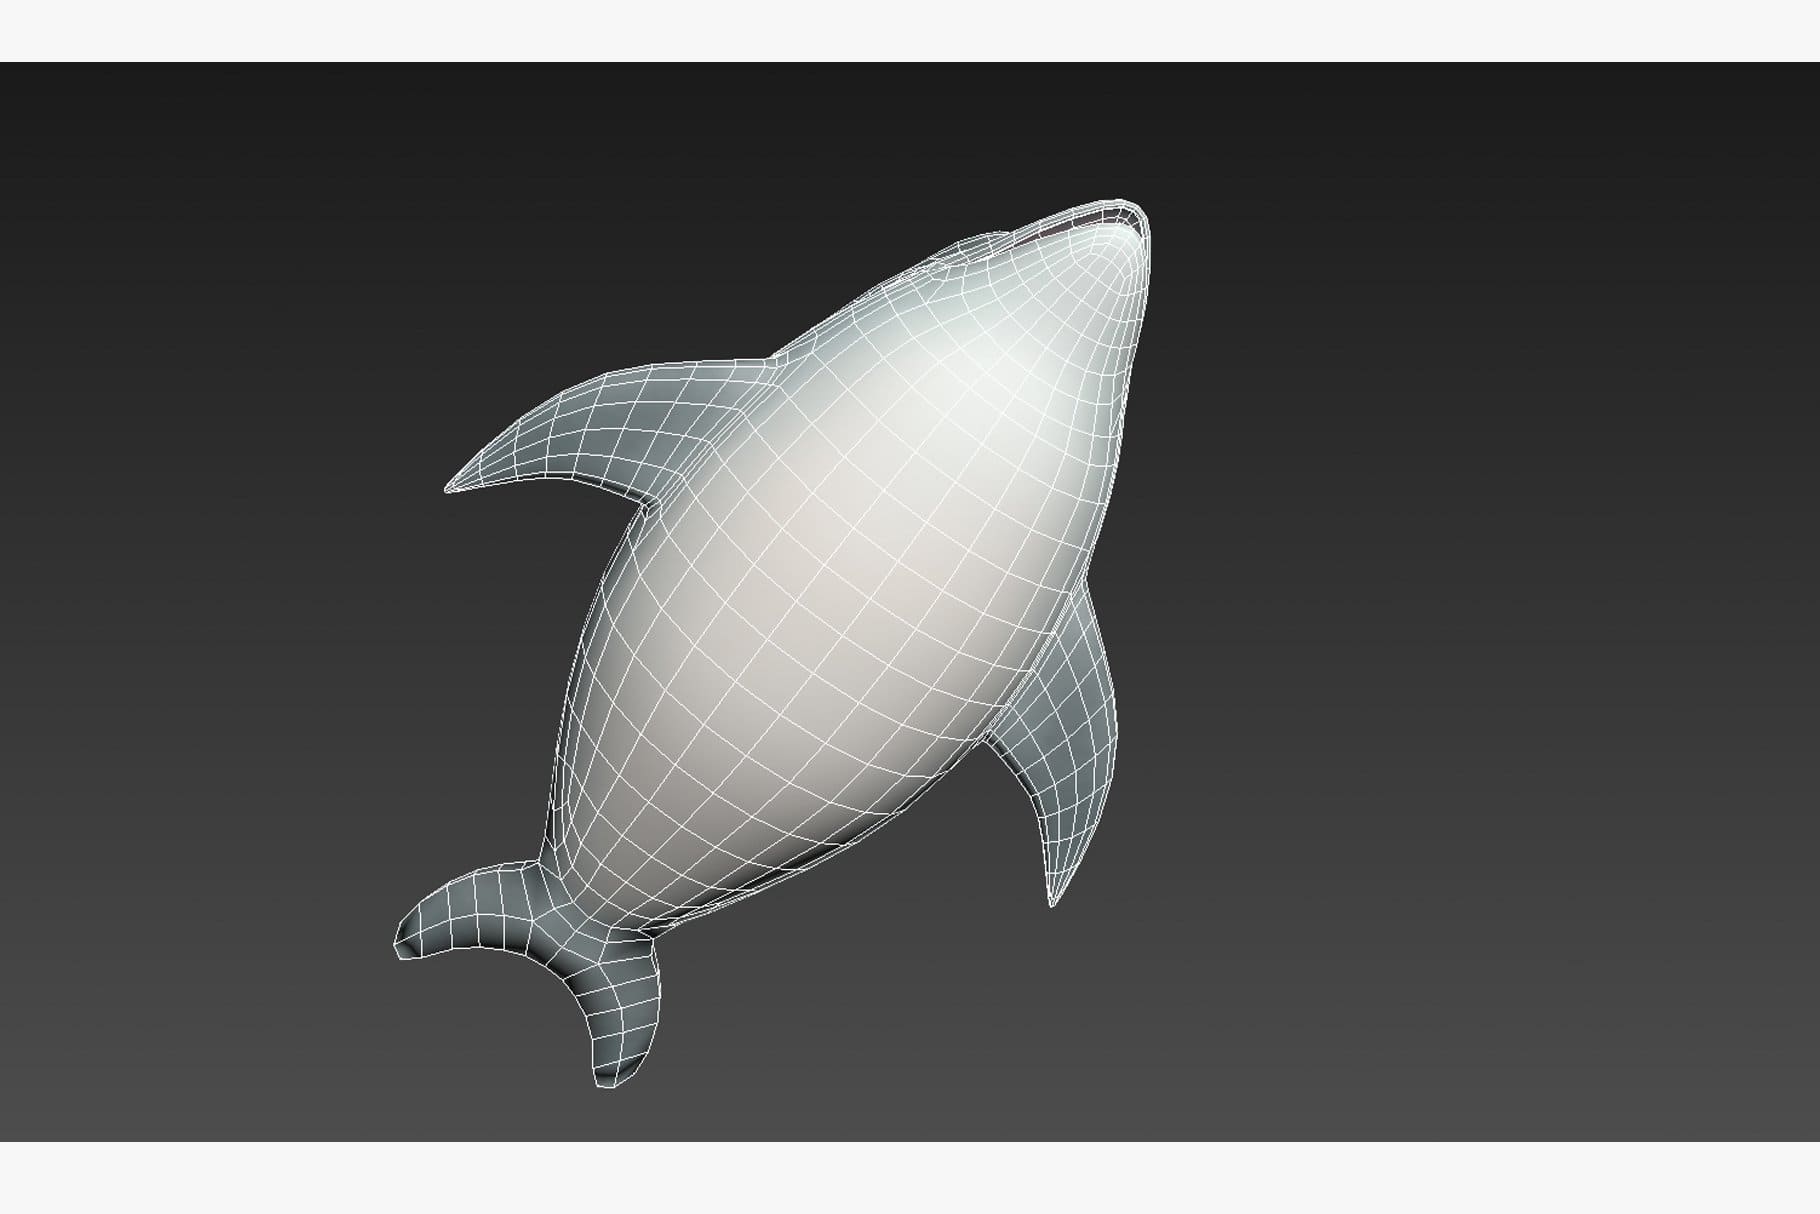 Mesh graphic model of a dolphin with its belly facing the camera.